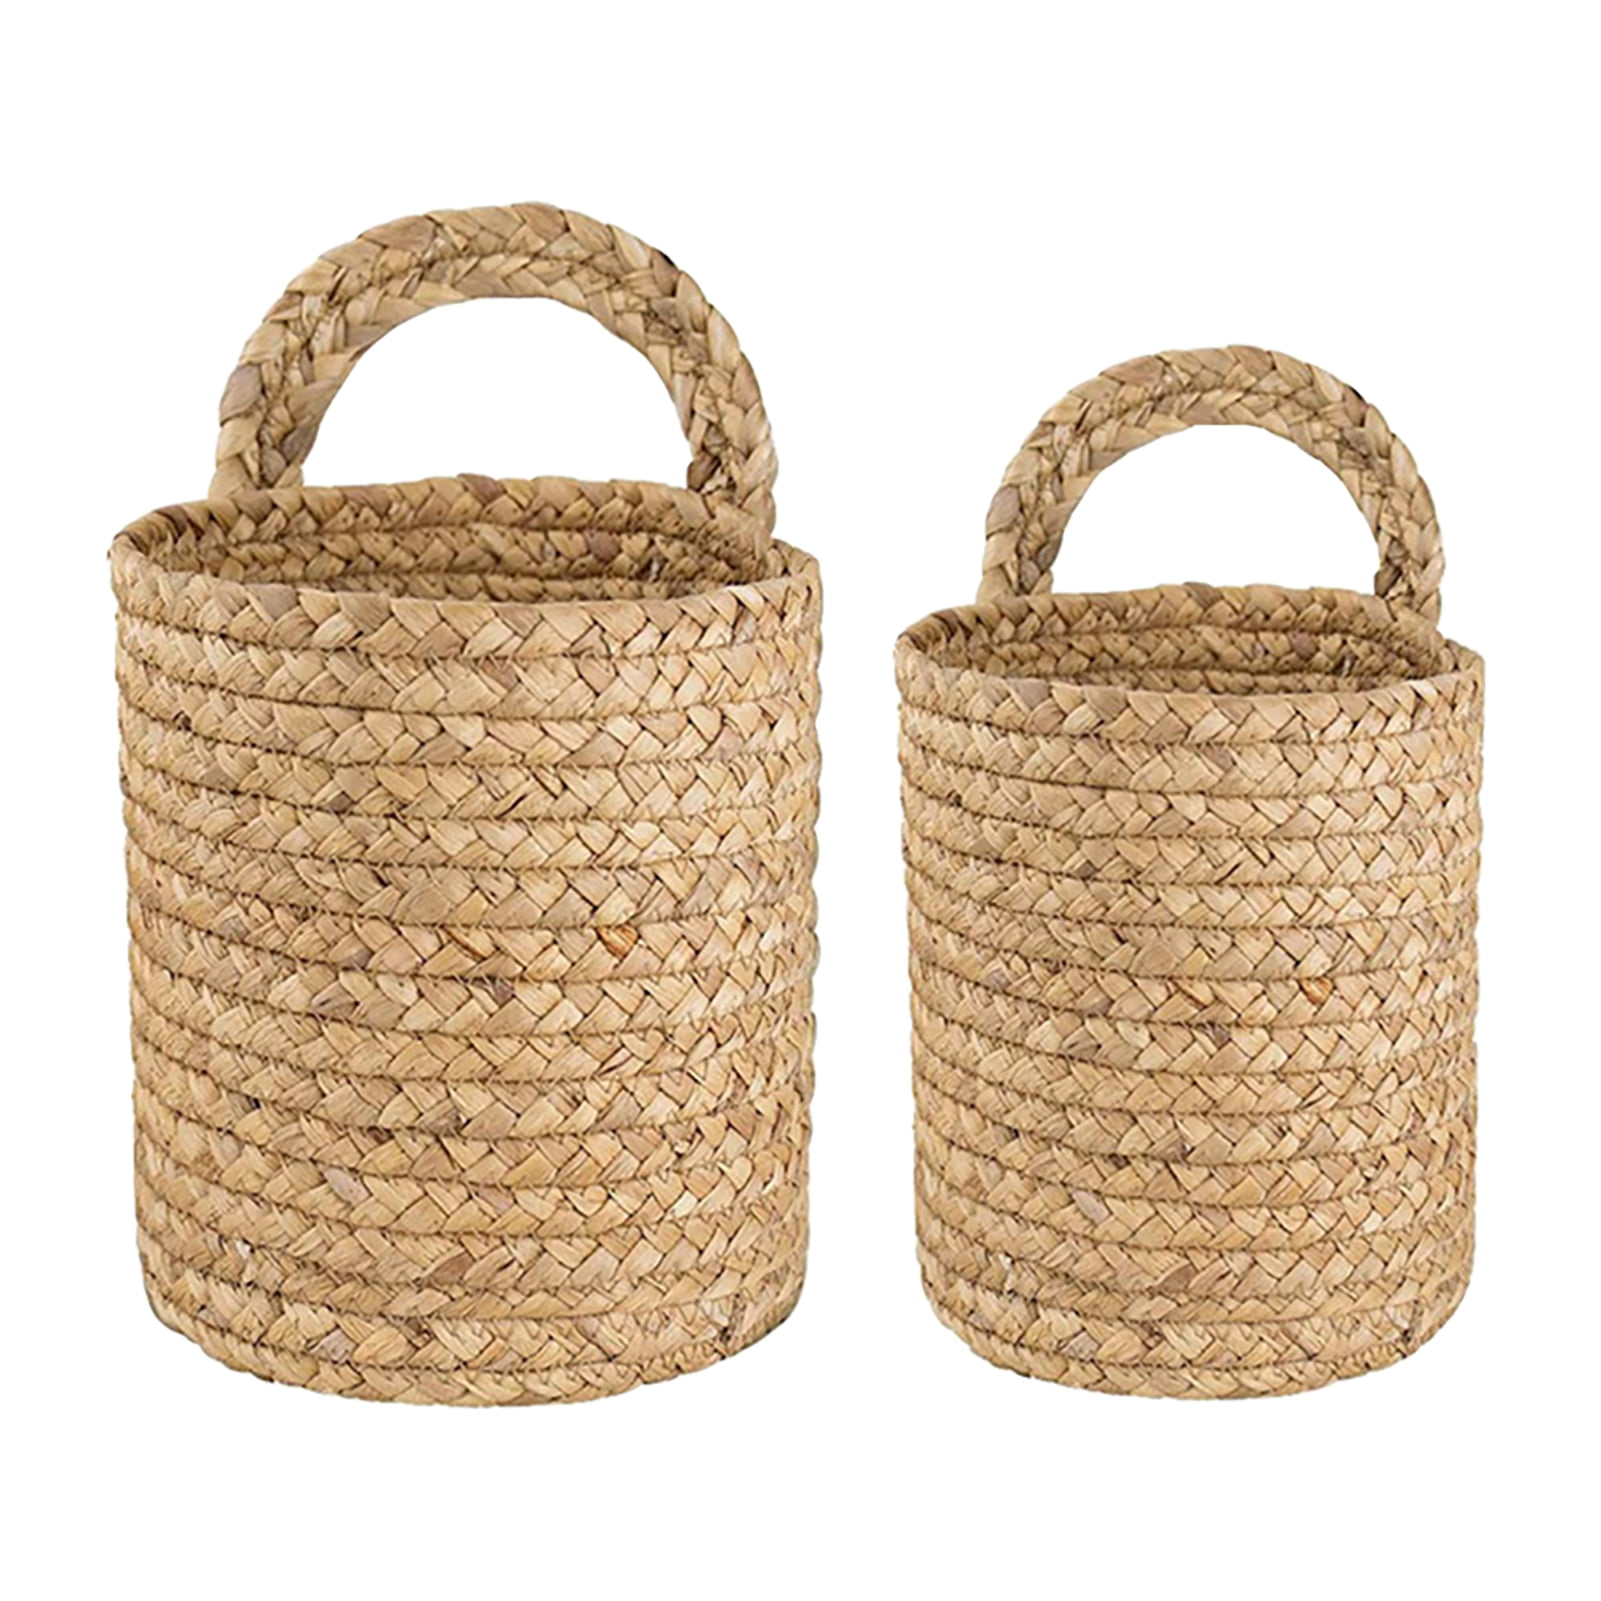 2pcs Wall Hanging Home Decor Bedroom Seagrass Woven Space Saving Storage Basket Com - Round Wicker Baskets To Hang On Wall